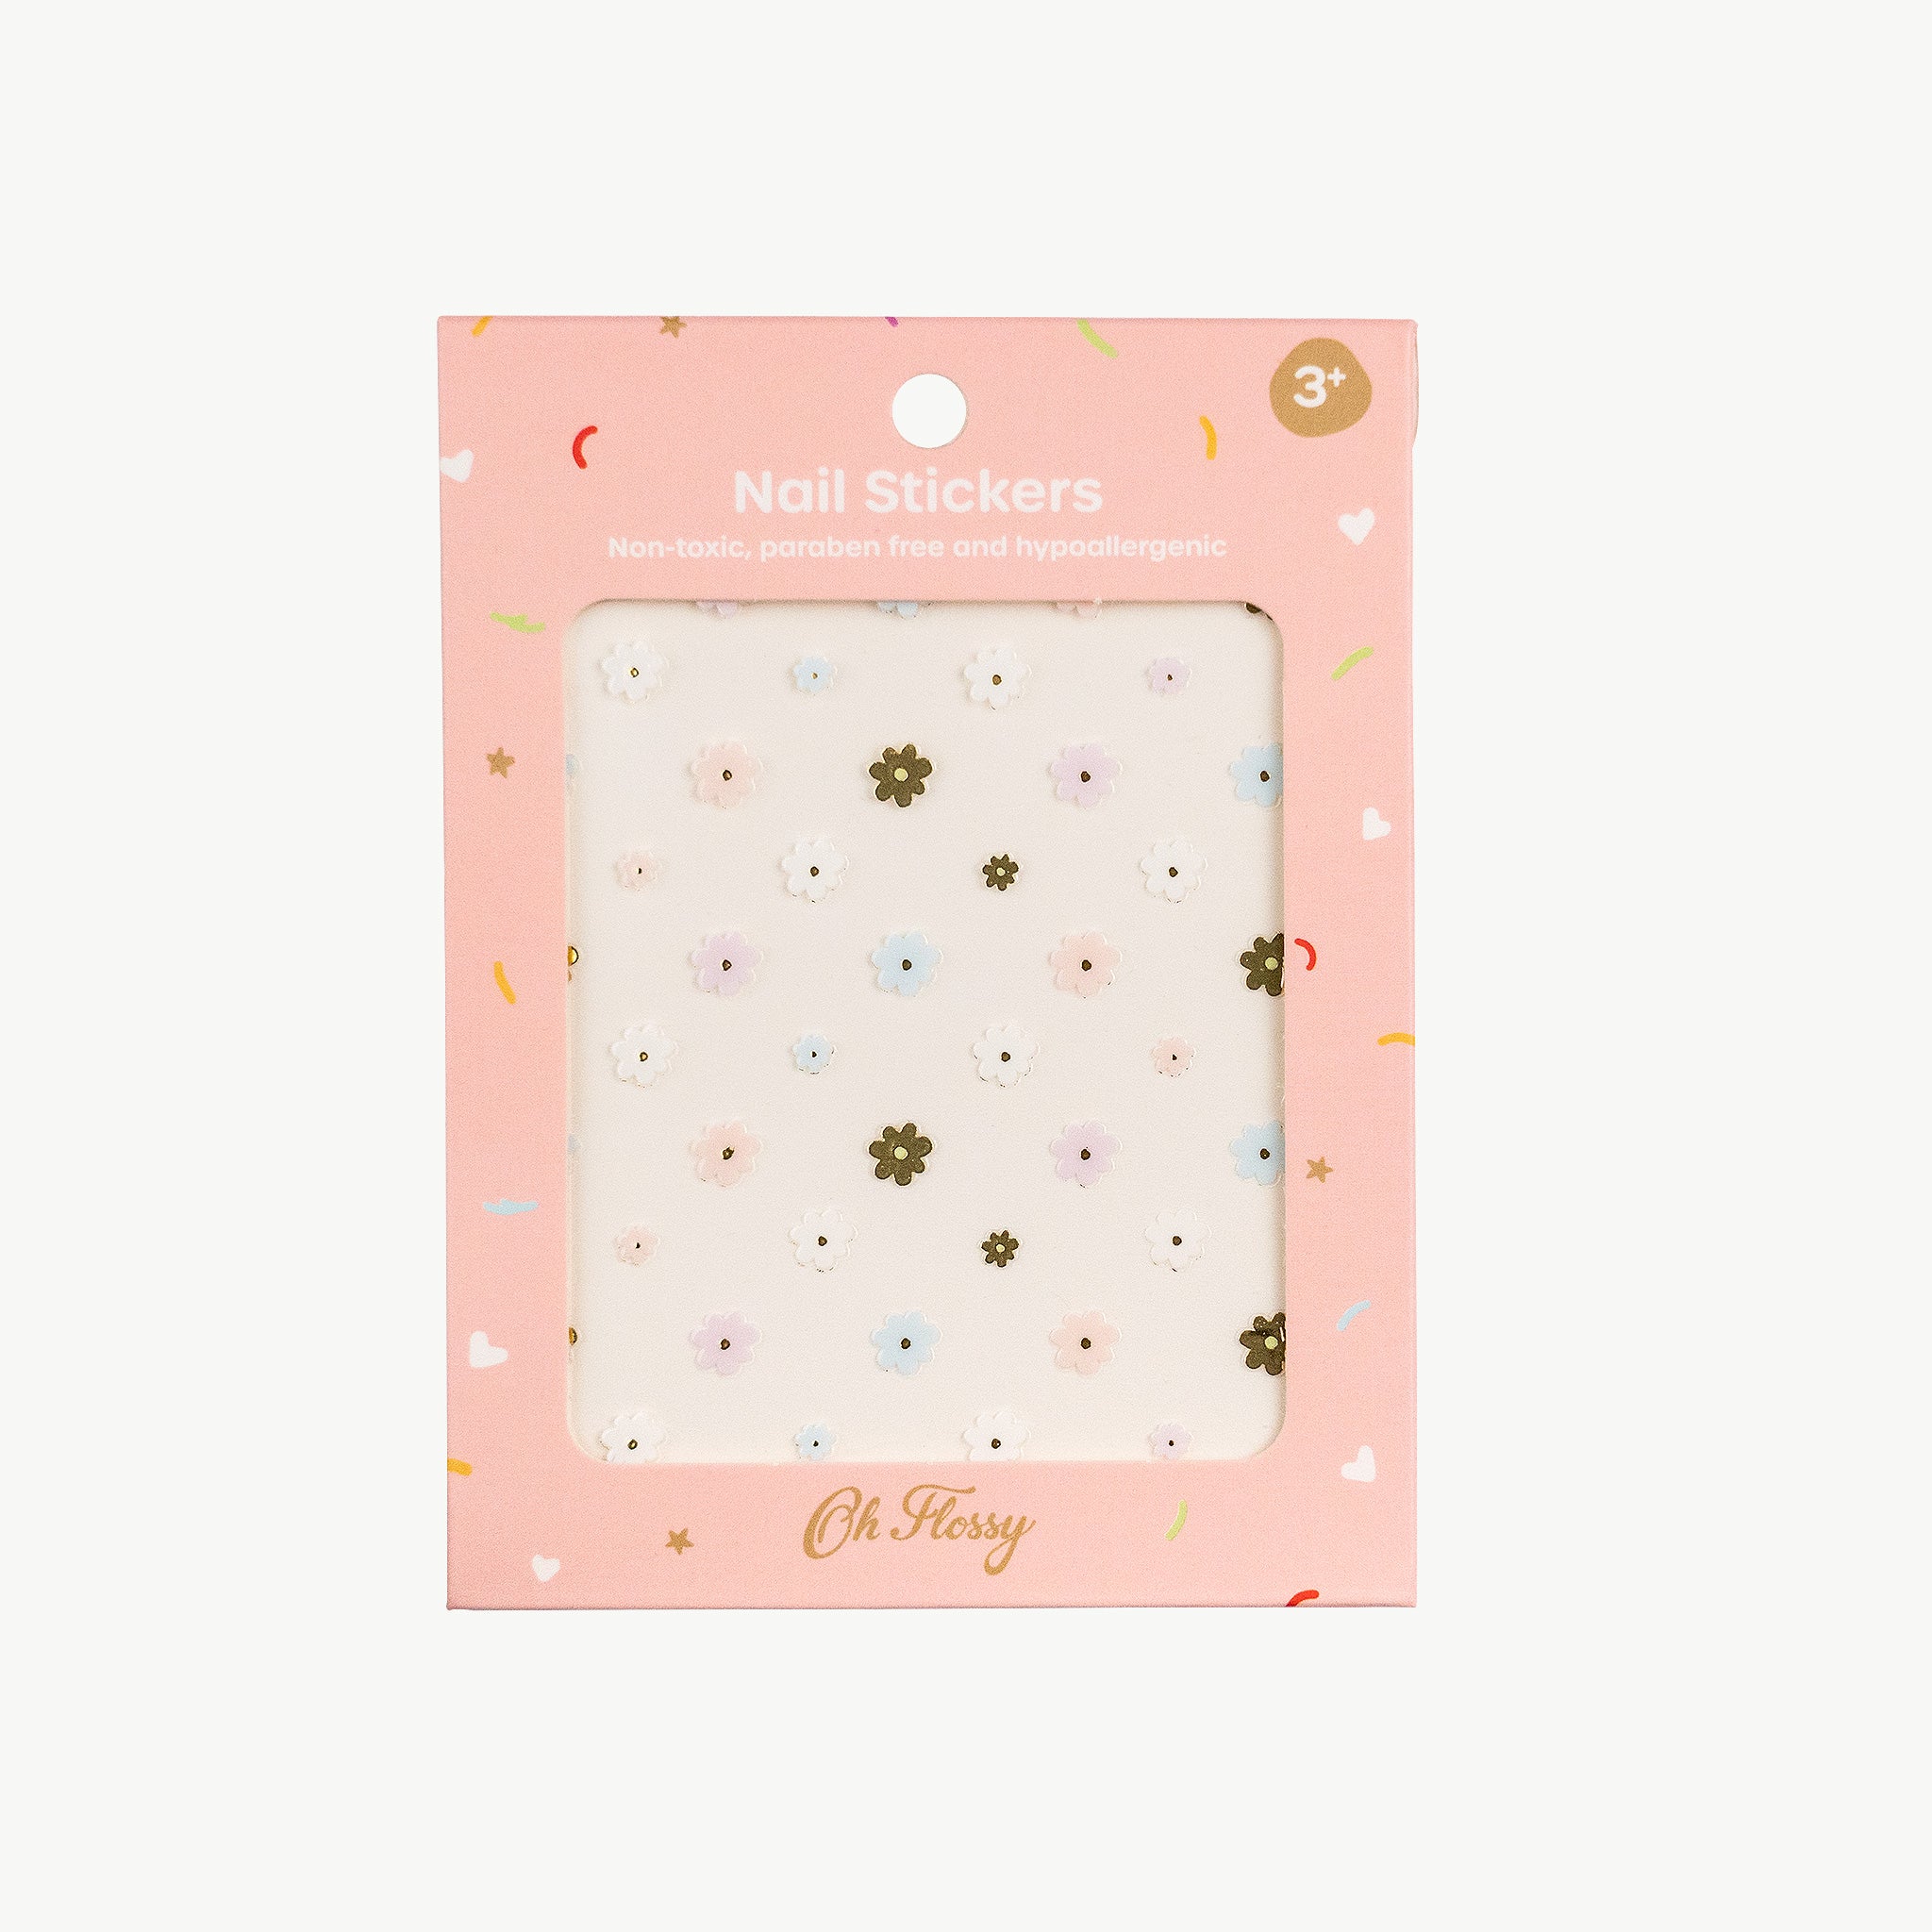    Oh-Flossy-Kids-Natural-Makeup-Nail-Stickers-Flowers